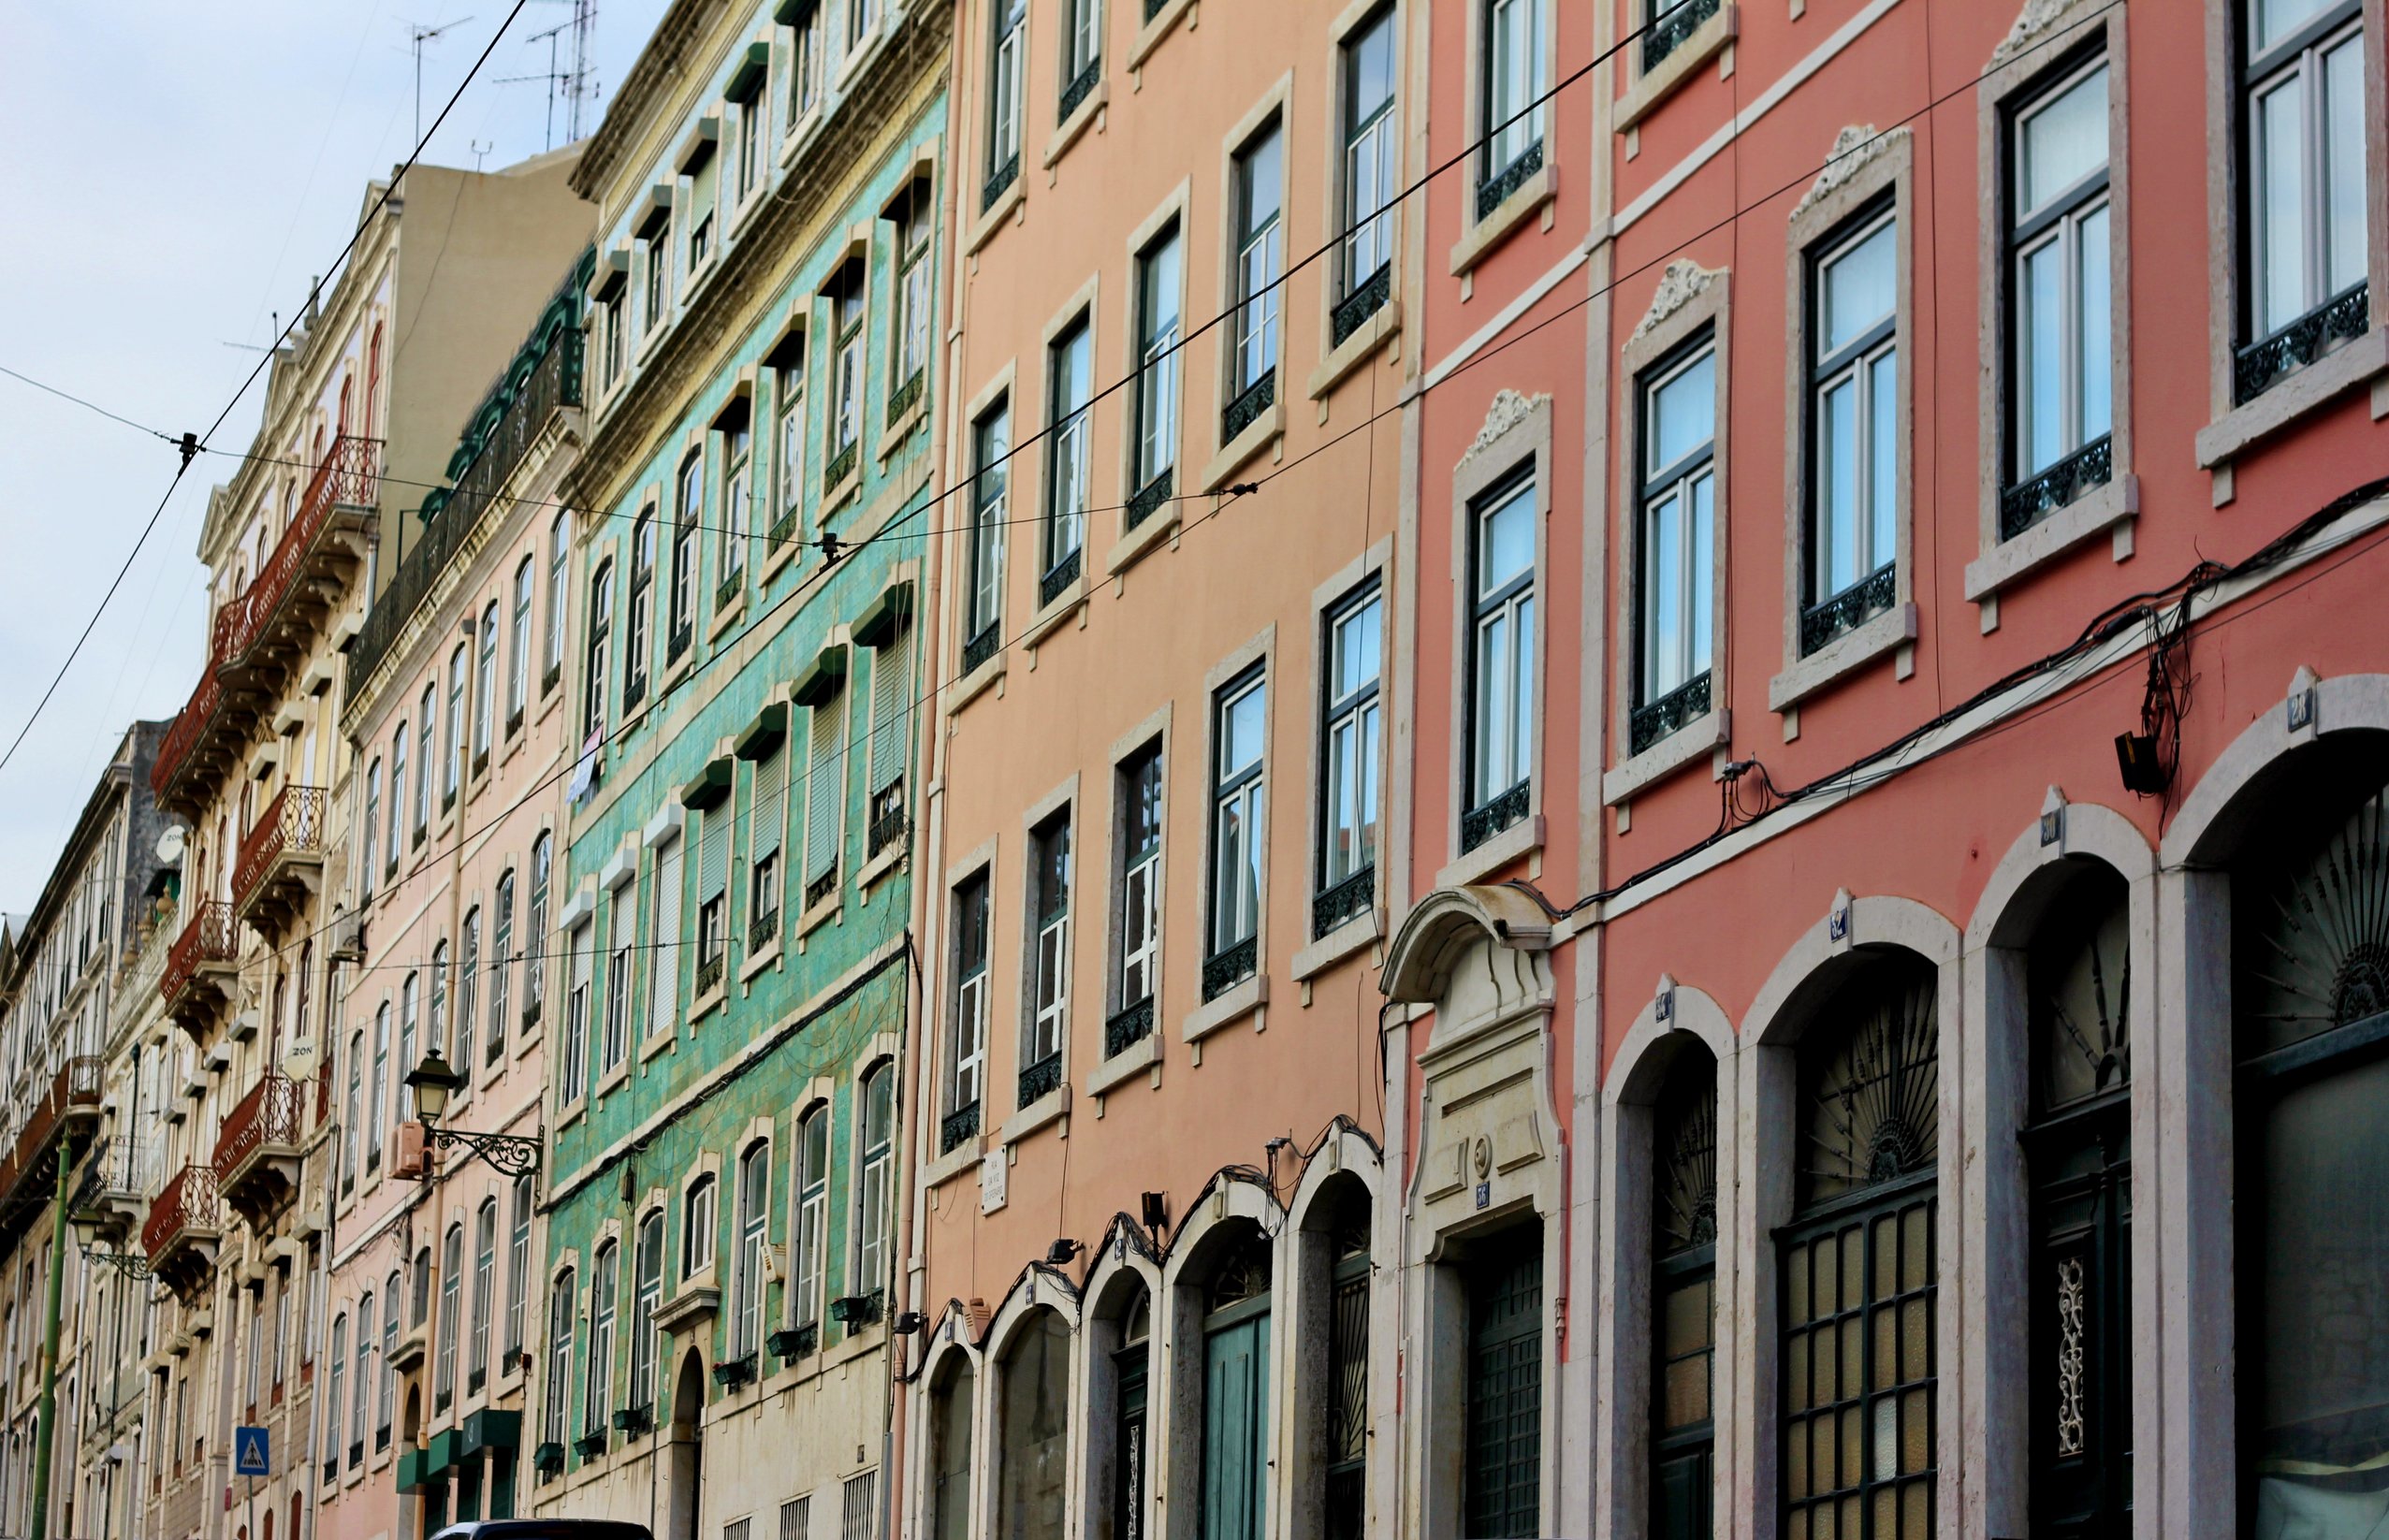 Brightly painted houses - 12 reasons to love Lisbon